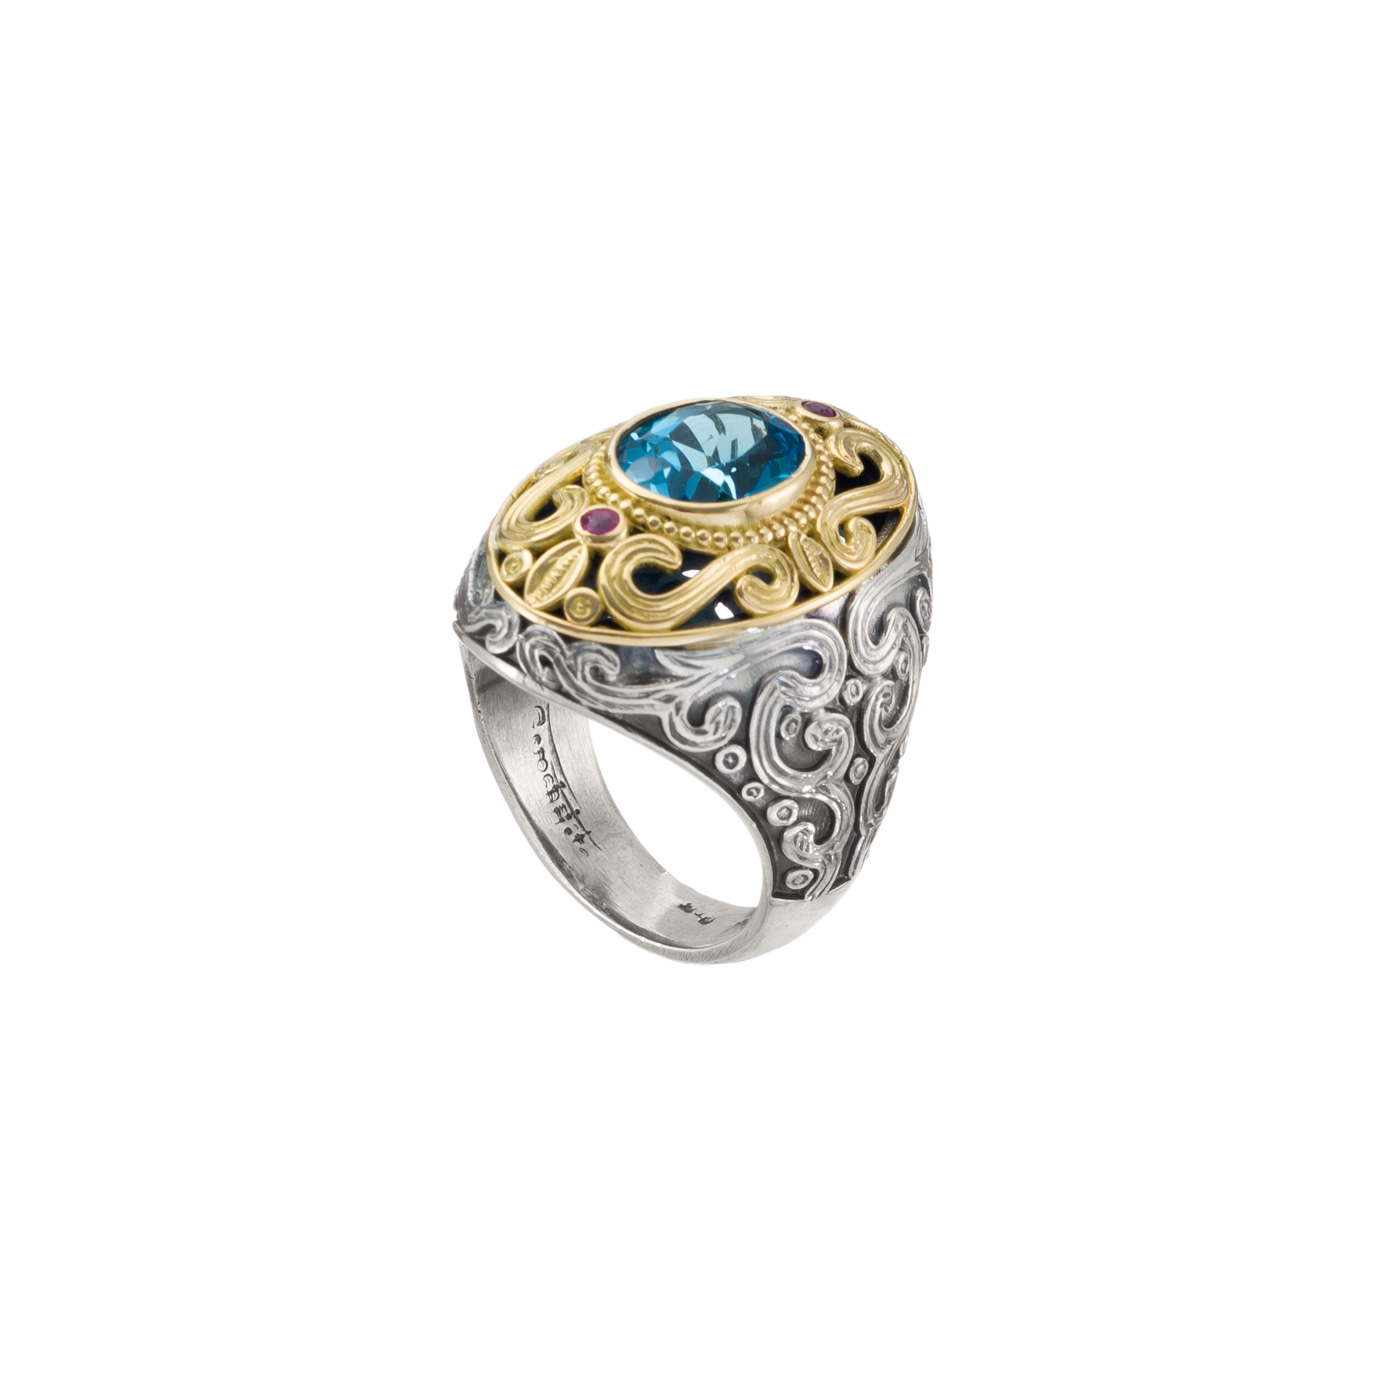 Byzantine ring in 18K Gold and Sterling Silver with blue topaz